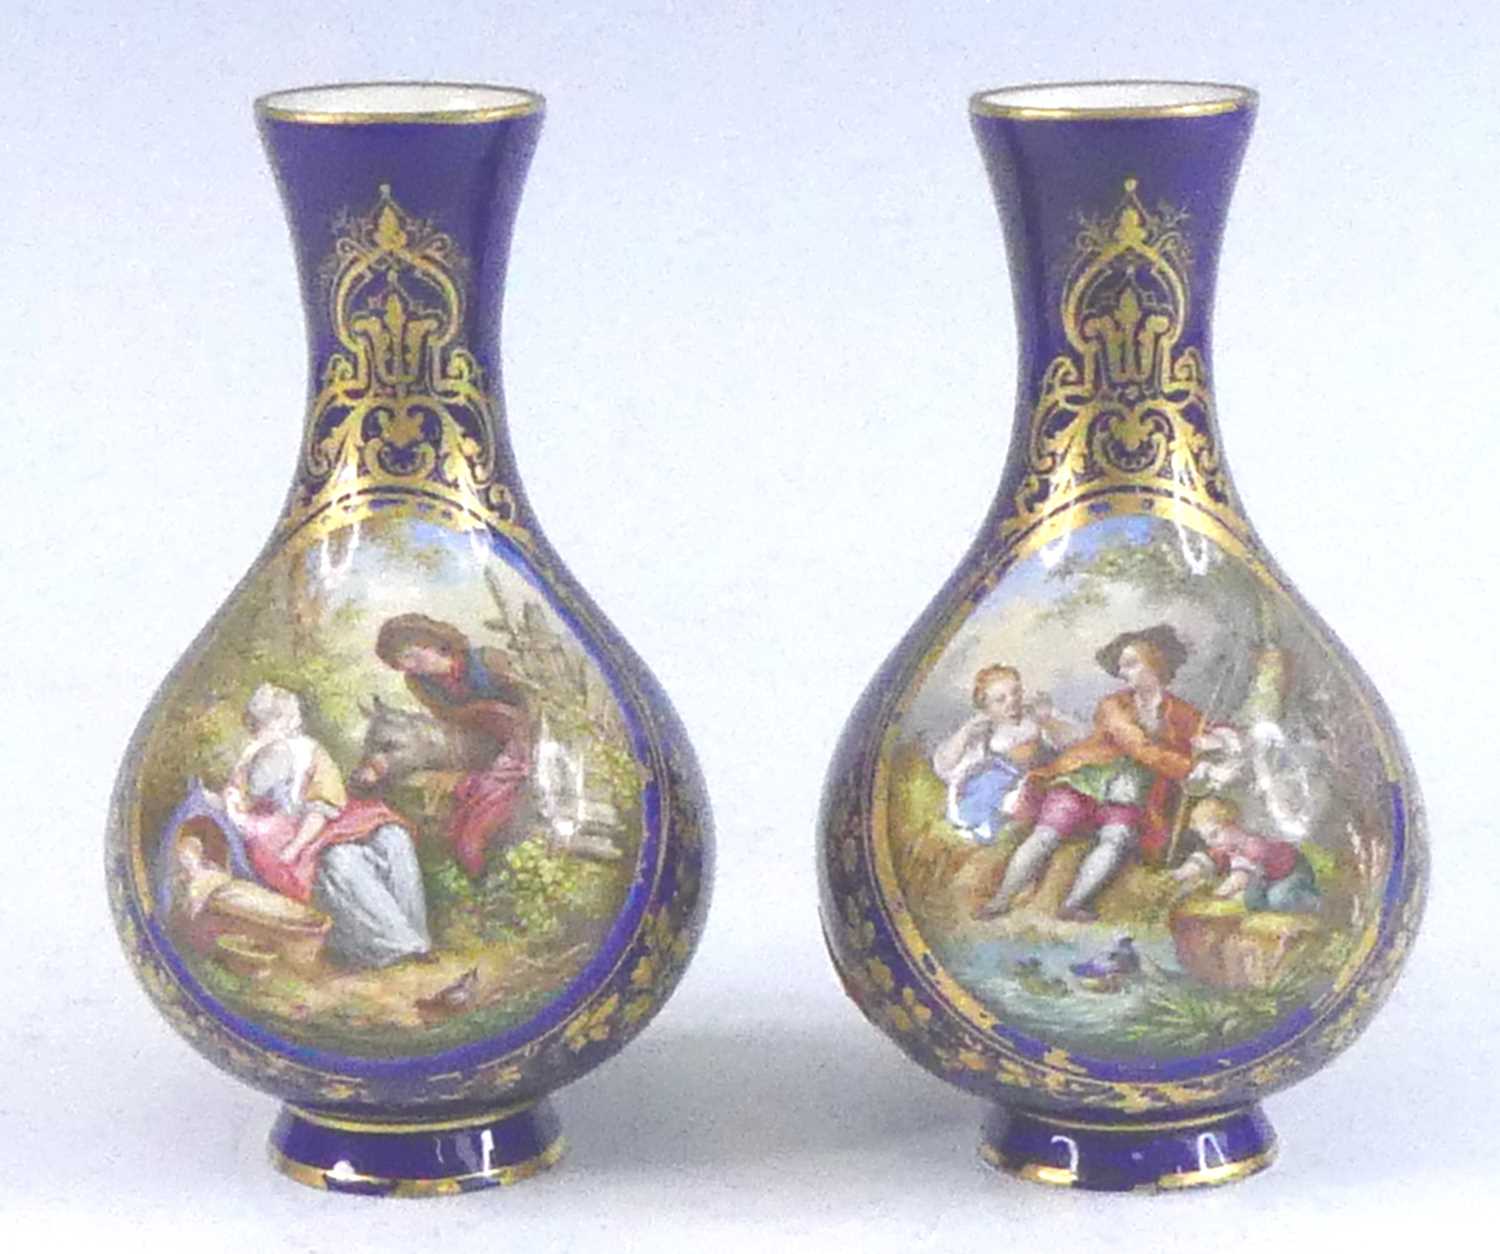 A pair of Sevres porcelain vases, 19th century, each decorated with children in 18th century dress